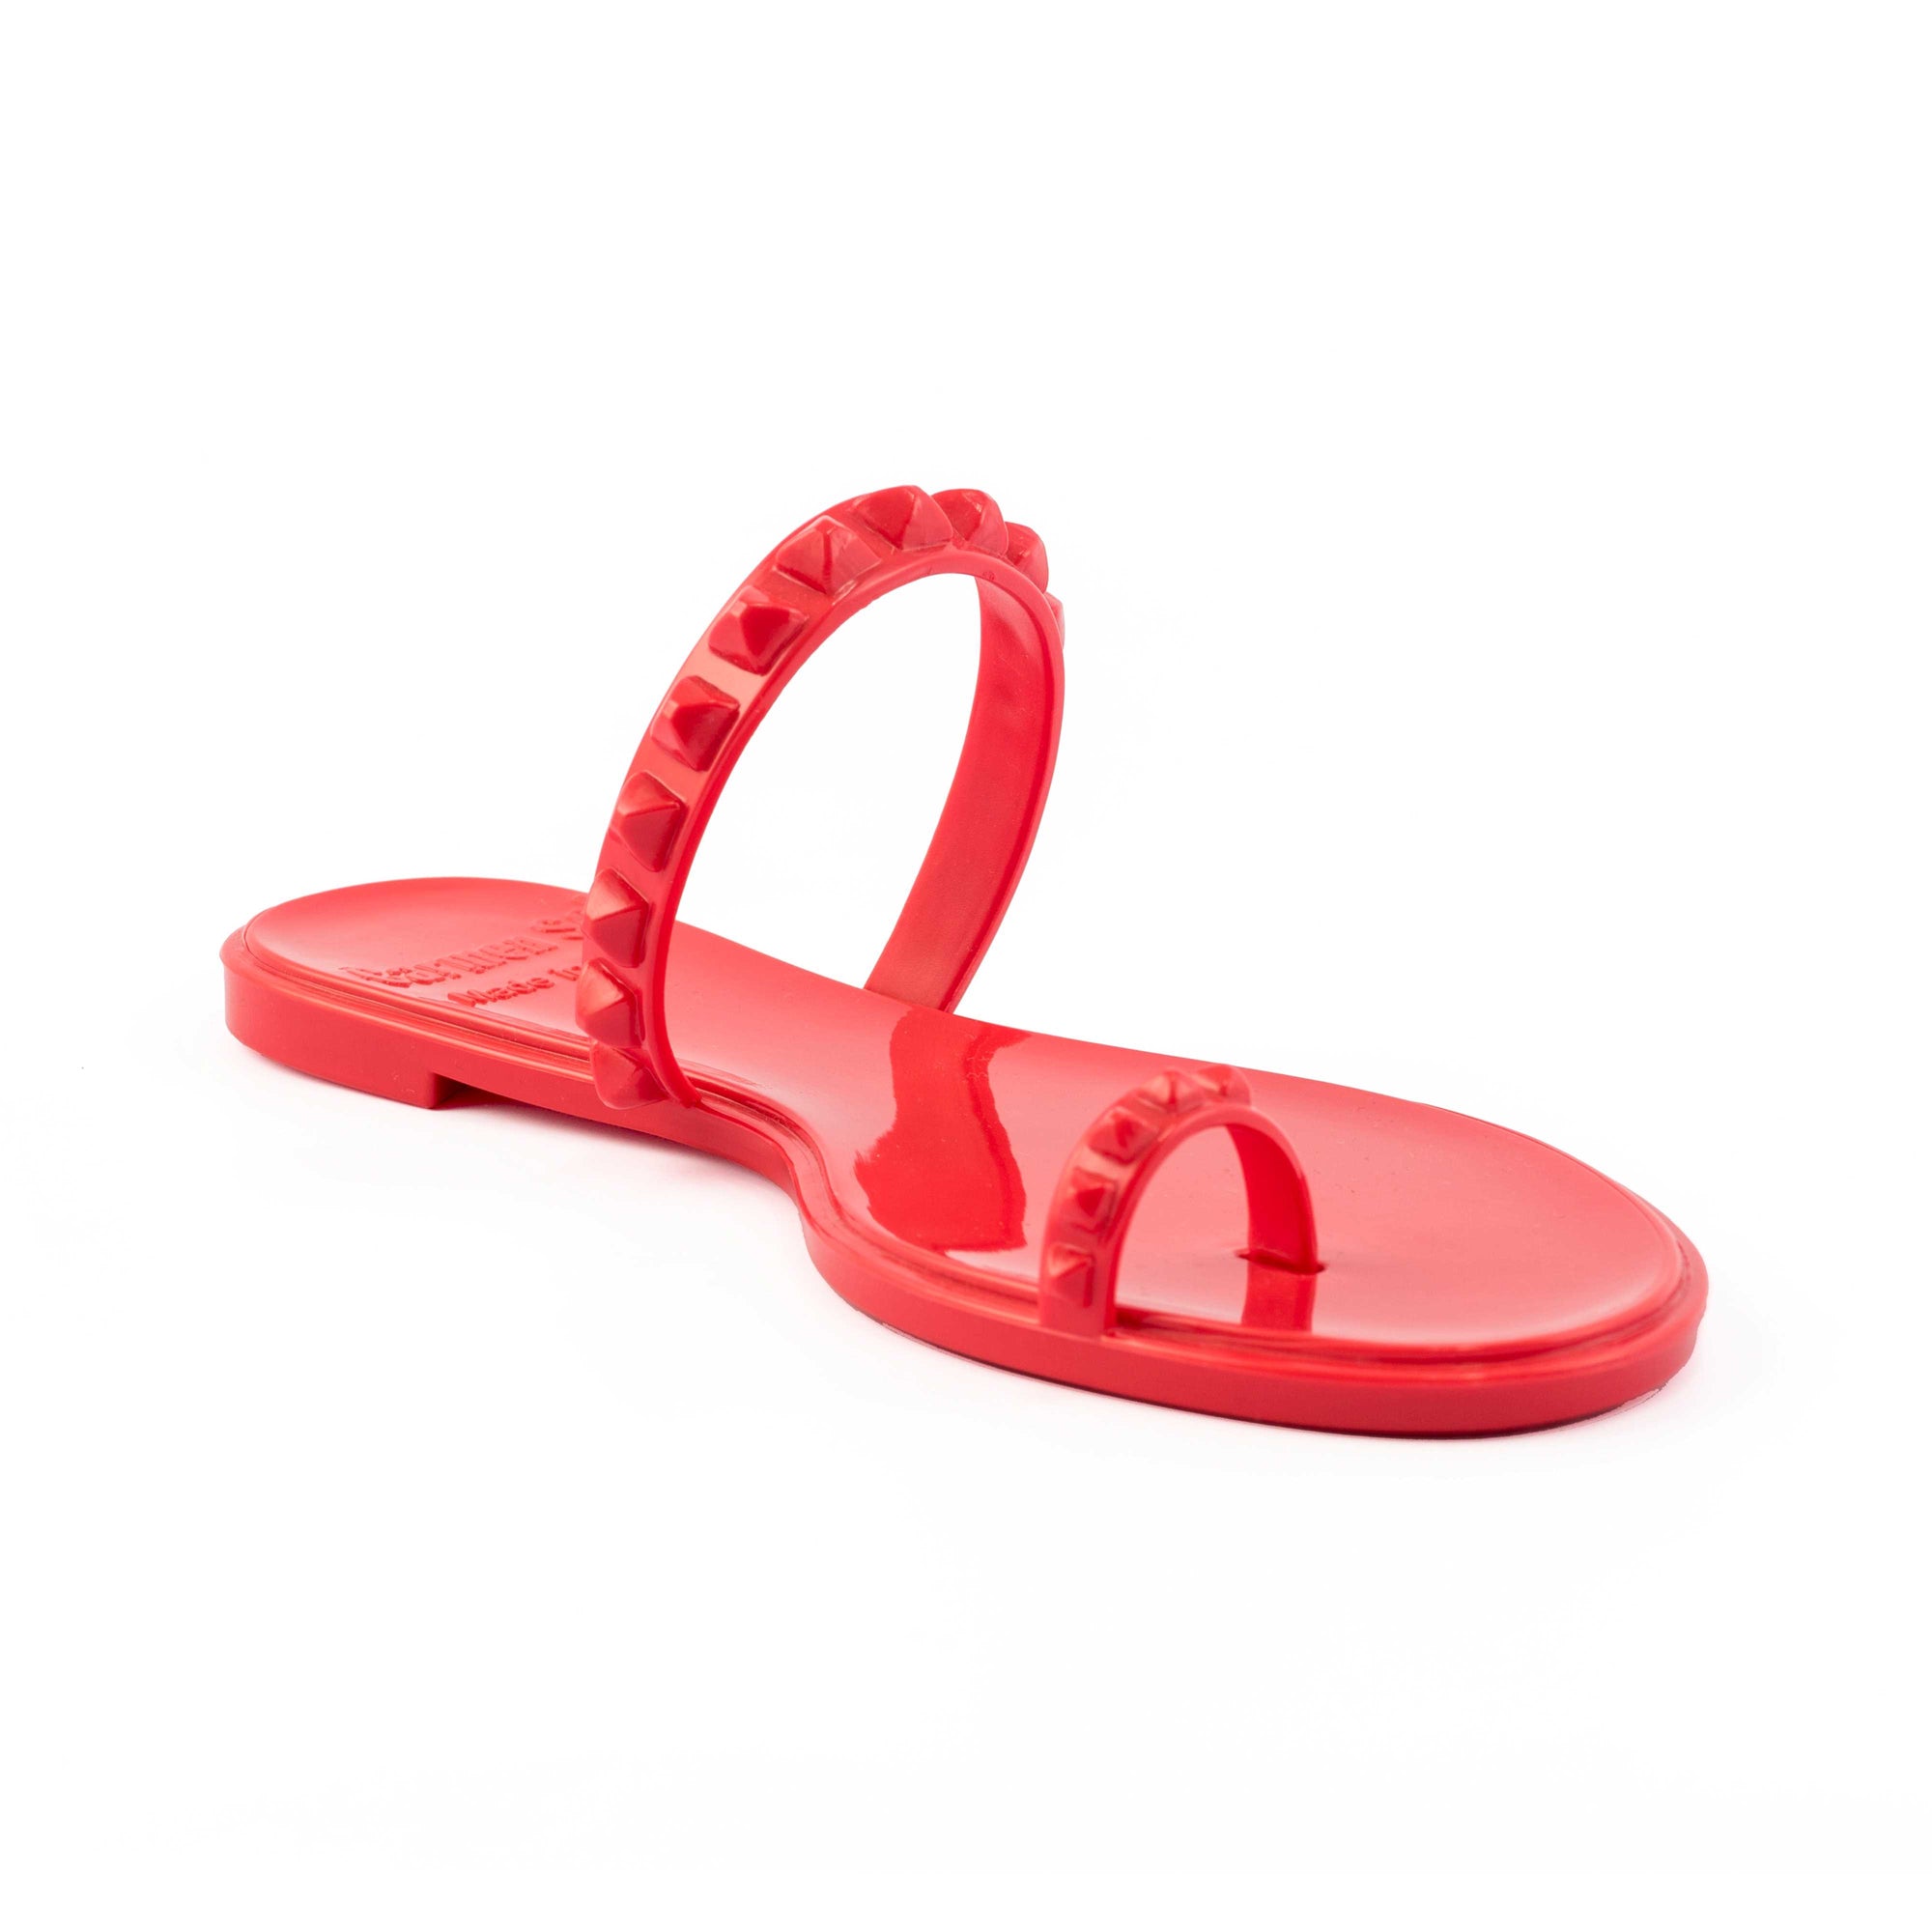 Maria red jelly studded sandals perfect for the beach